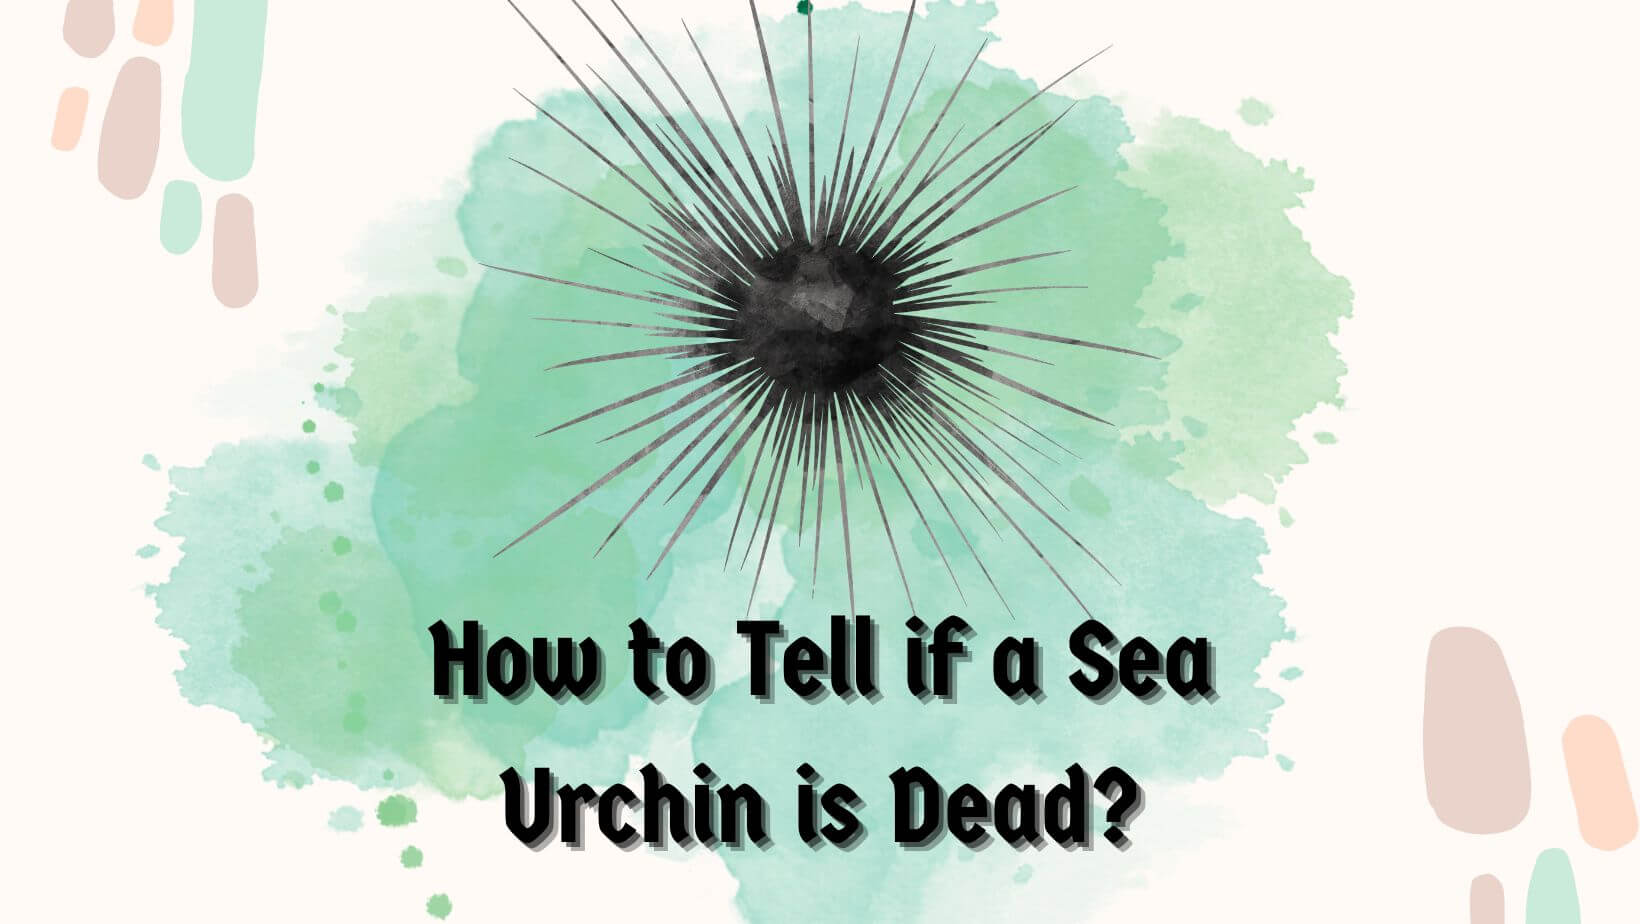 How to Tell if a Sea Urchin is Dead?